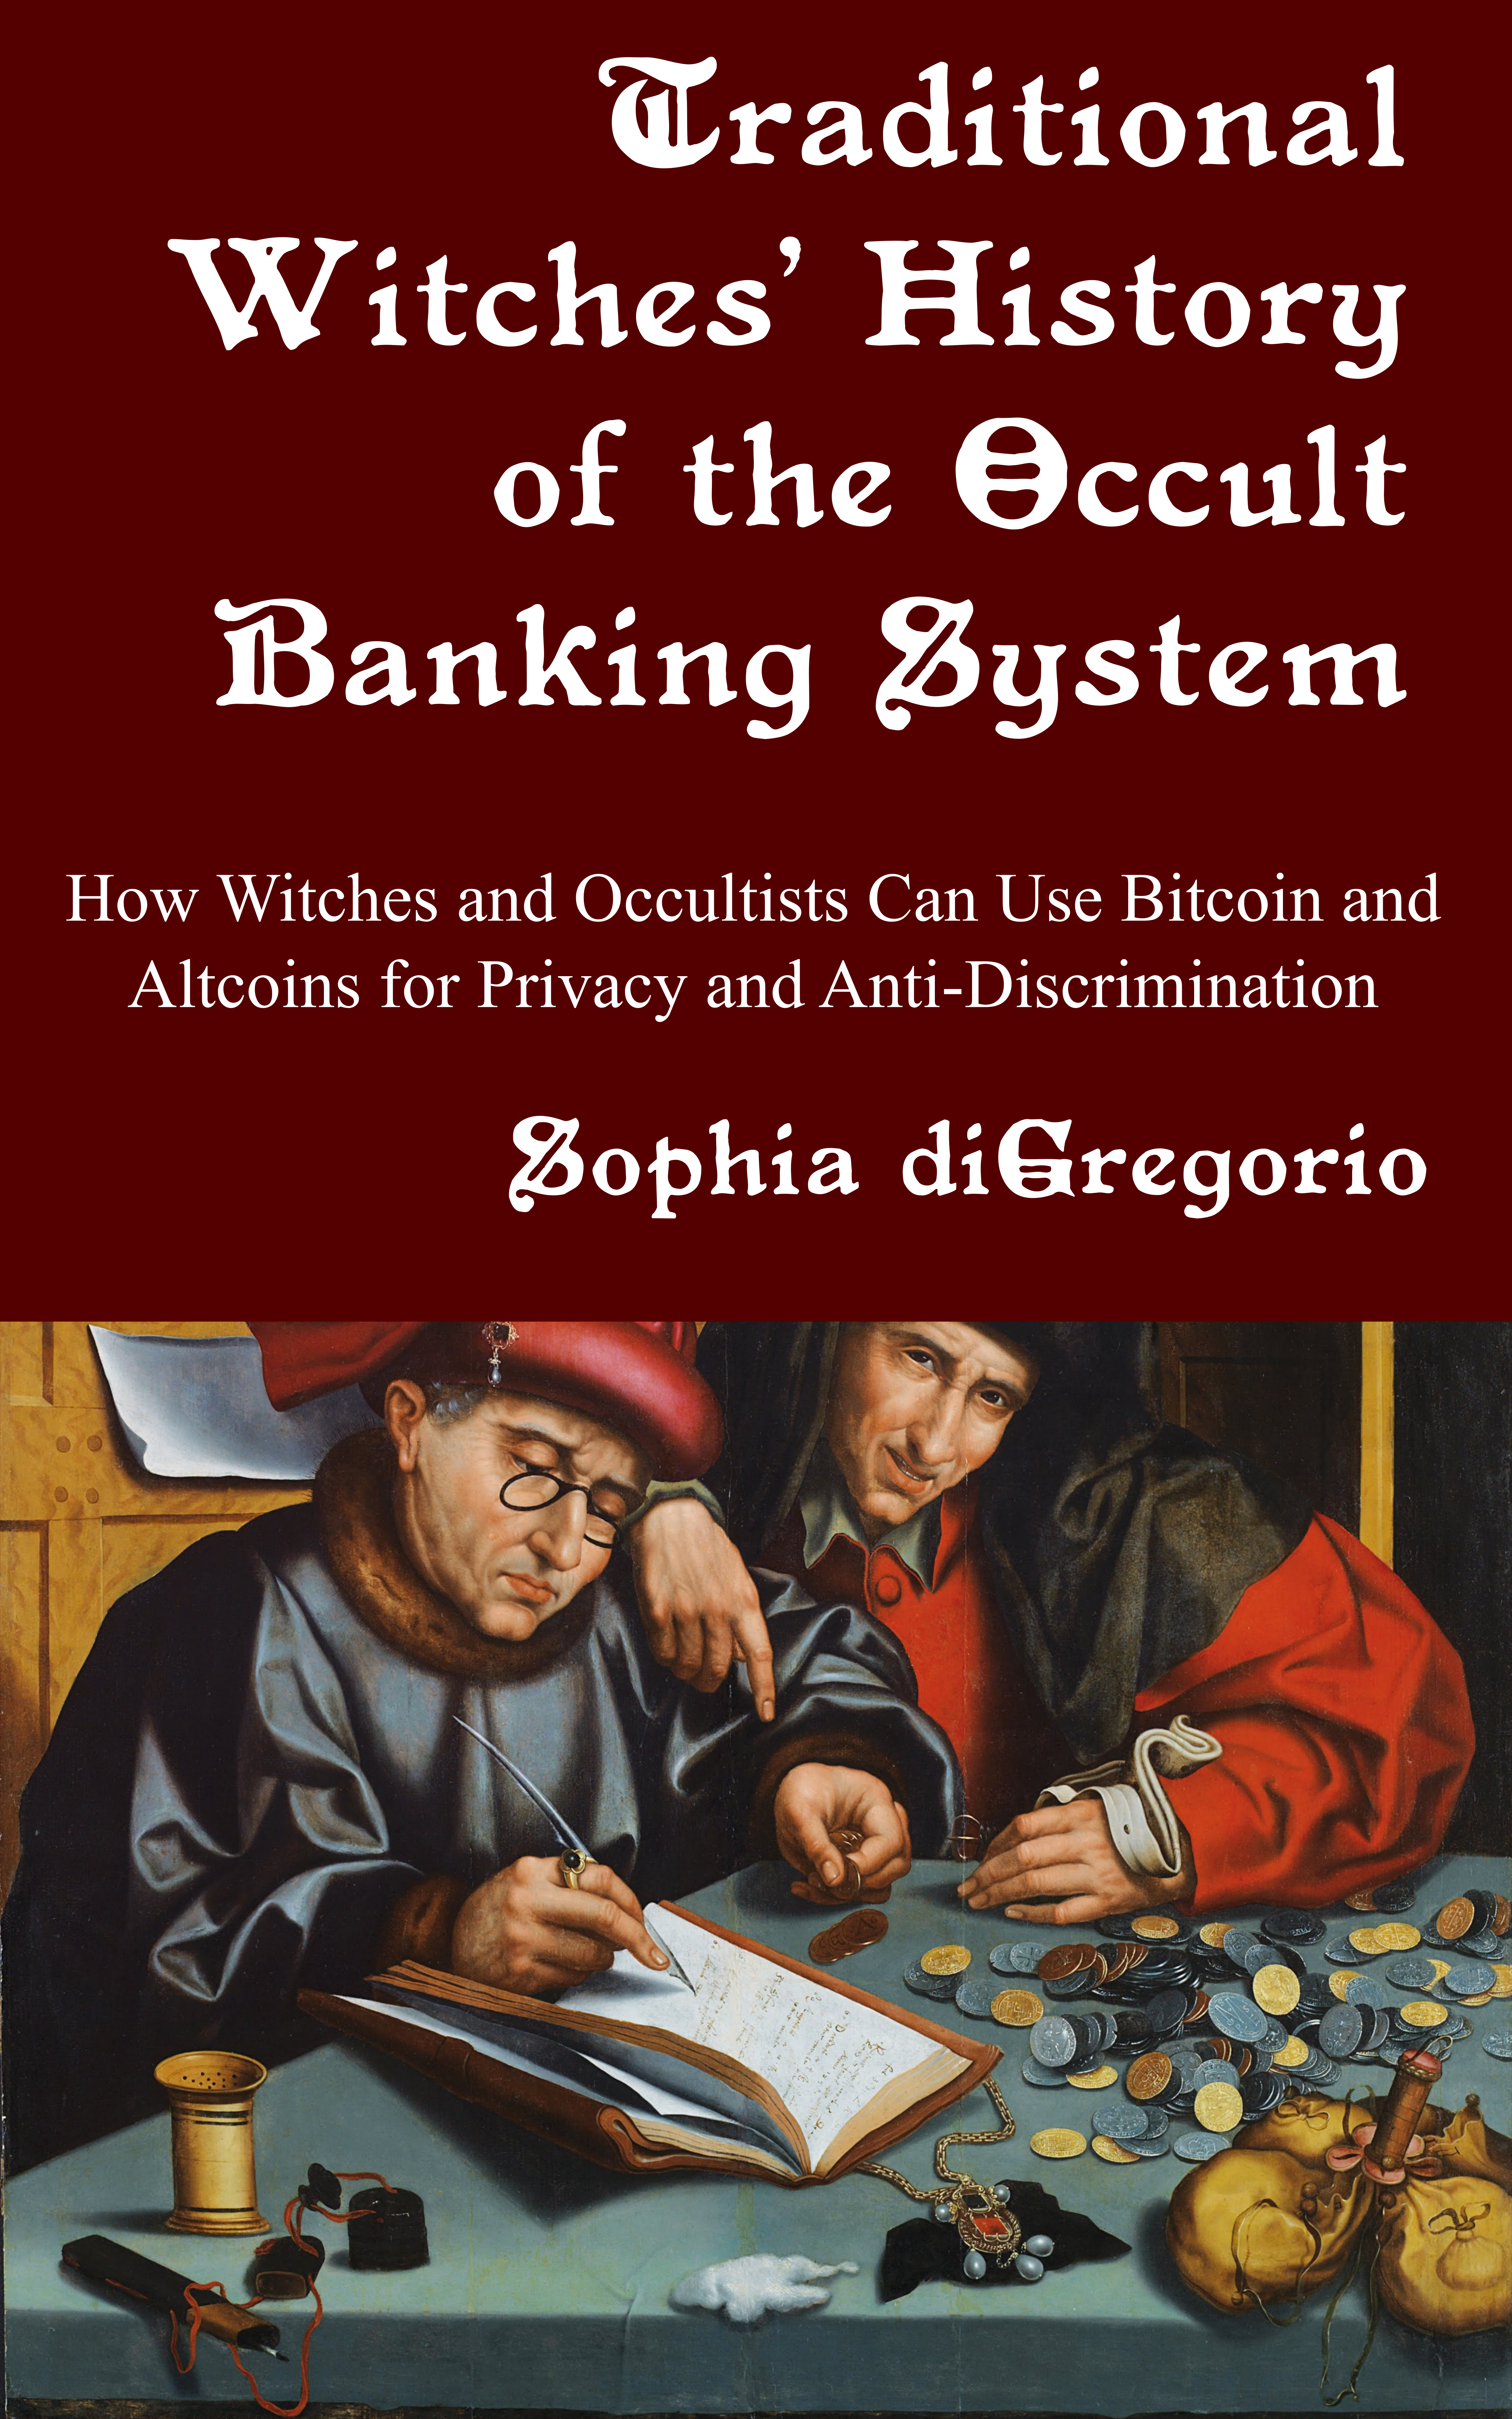 Traditional Witches' History of the Occult Banking System: How Witches and Occultists Can Use Bitcoin and Altcoins for Privacy and Anti-Discrimination